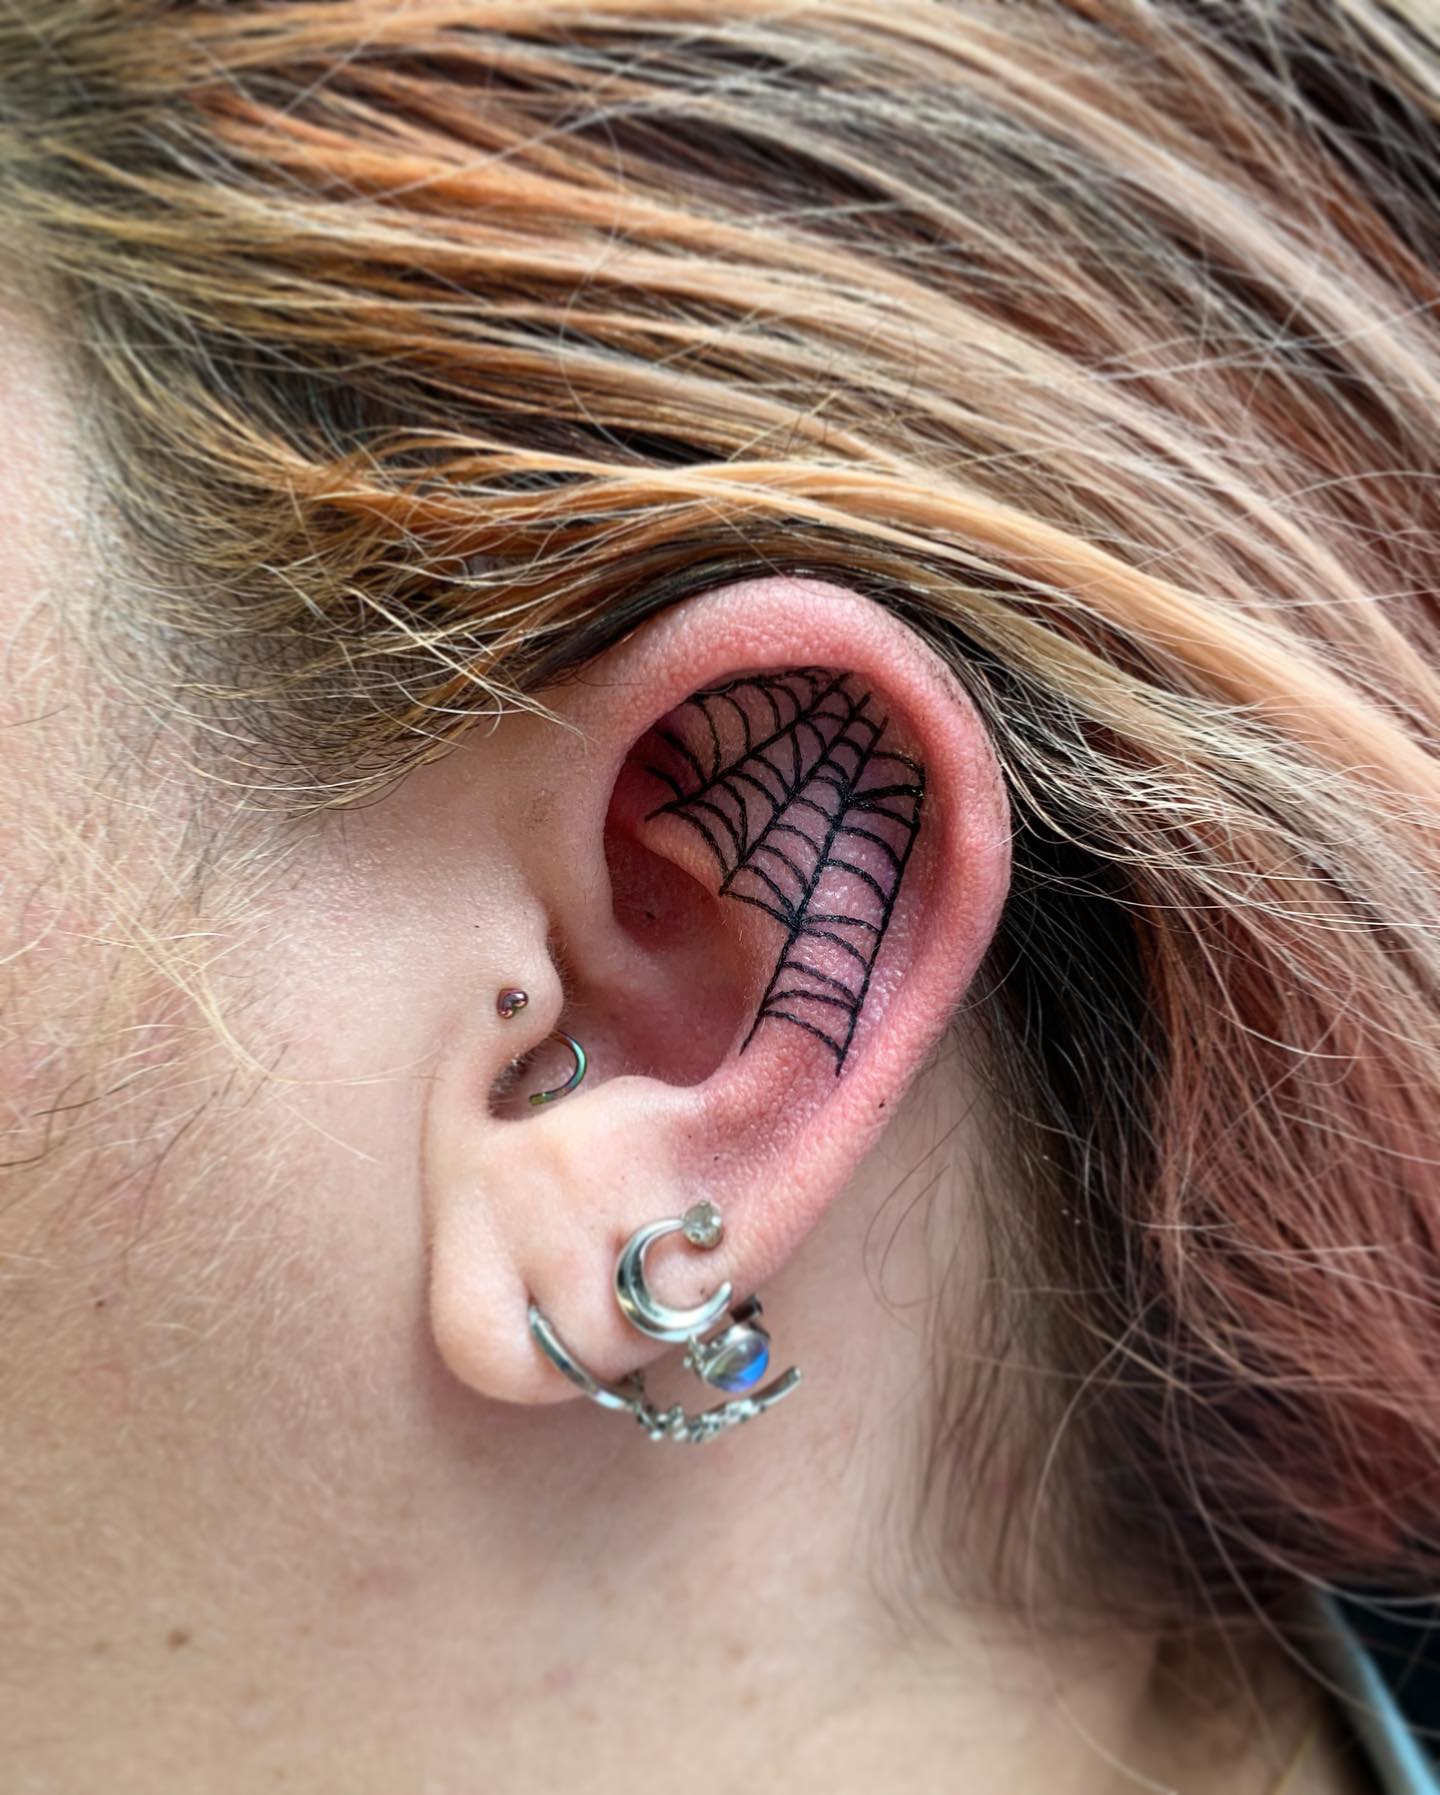 An ear tattoo and ear placement are something bold to go for. If you can handle the pain factor, this design is for you.